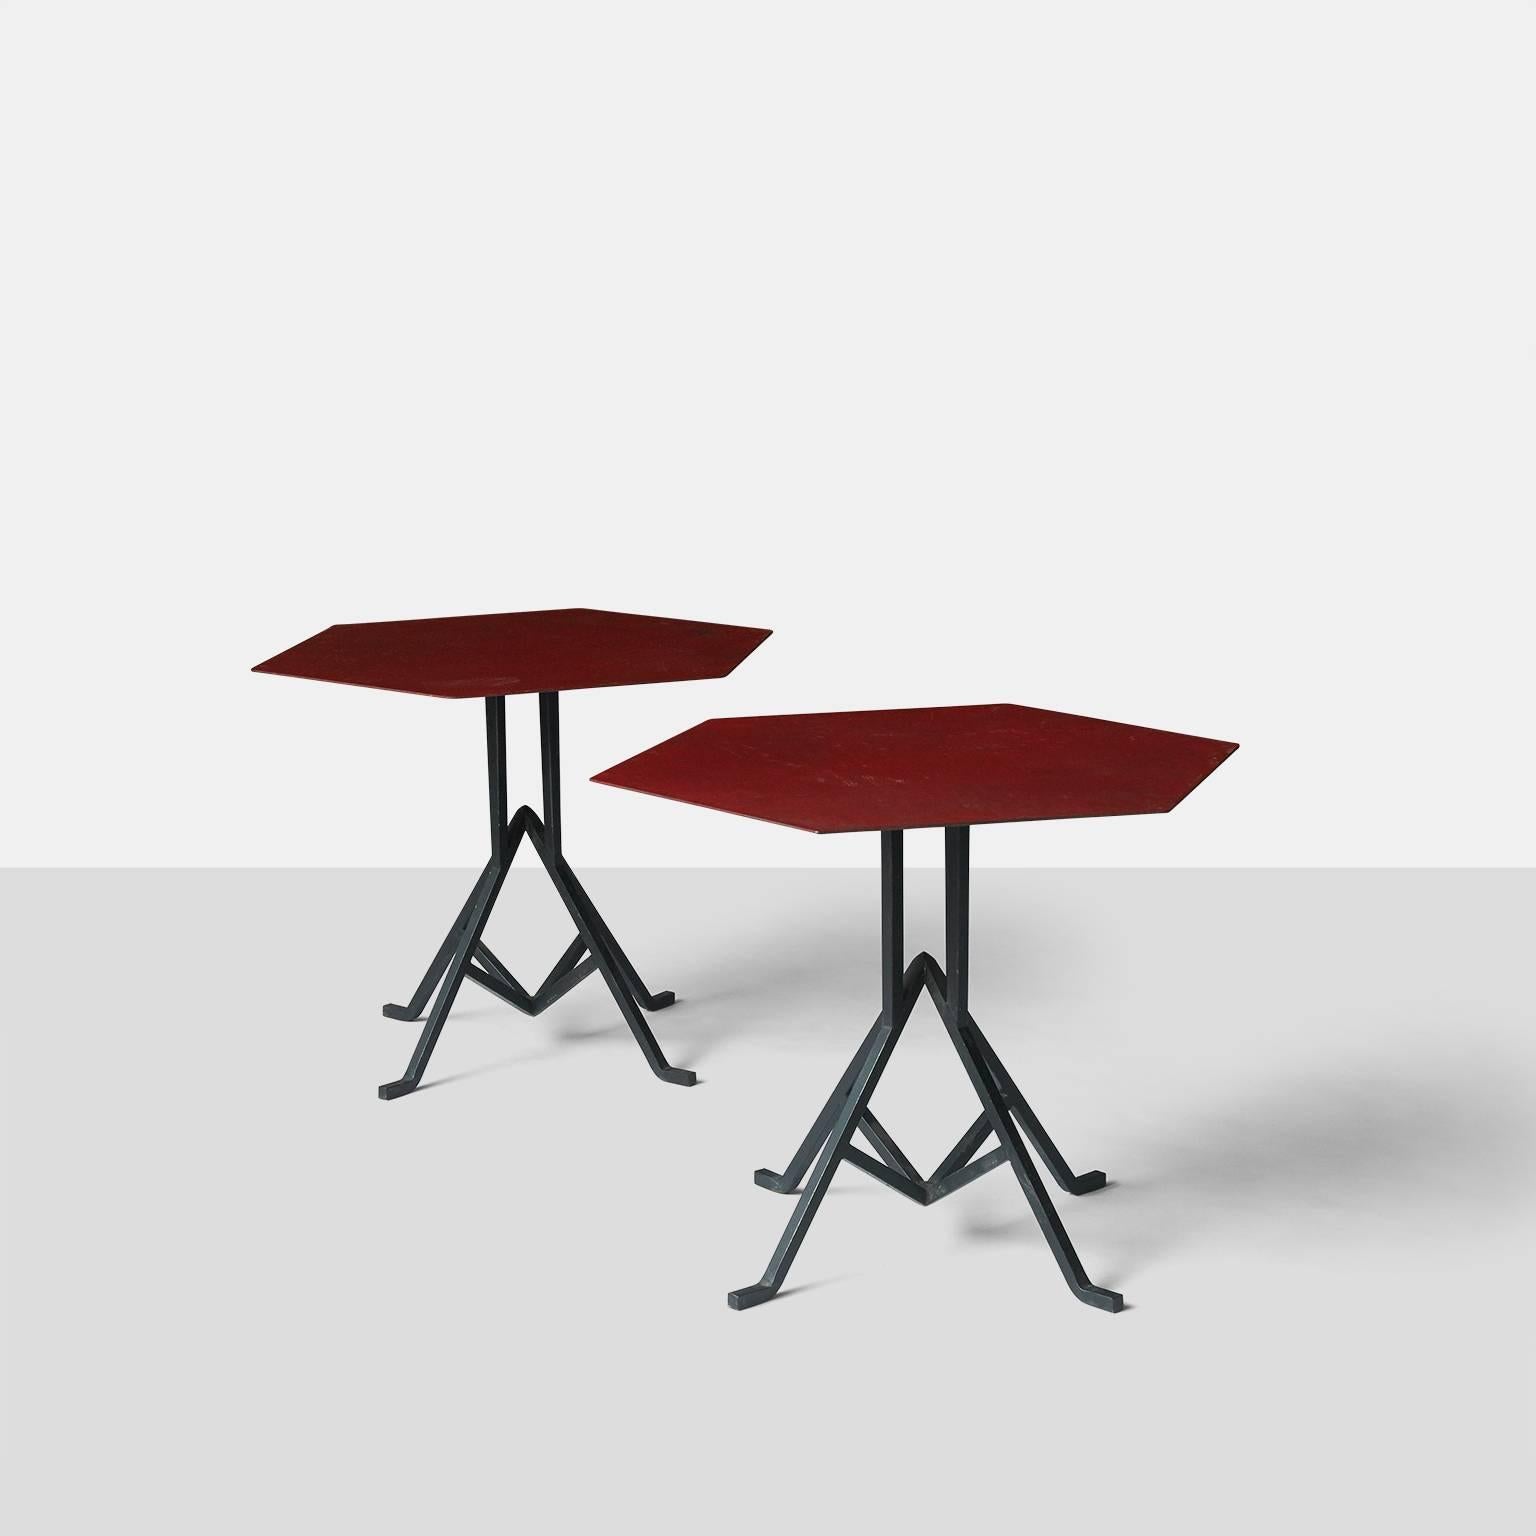 A pair of iron base coffee tables with a hexagon shaped metal top with the original red enamel finish. The metal base has an arrowhead motif which was used in Wright's early desert designs.
The tables were made in 1927 for the Biltmore Hotel in